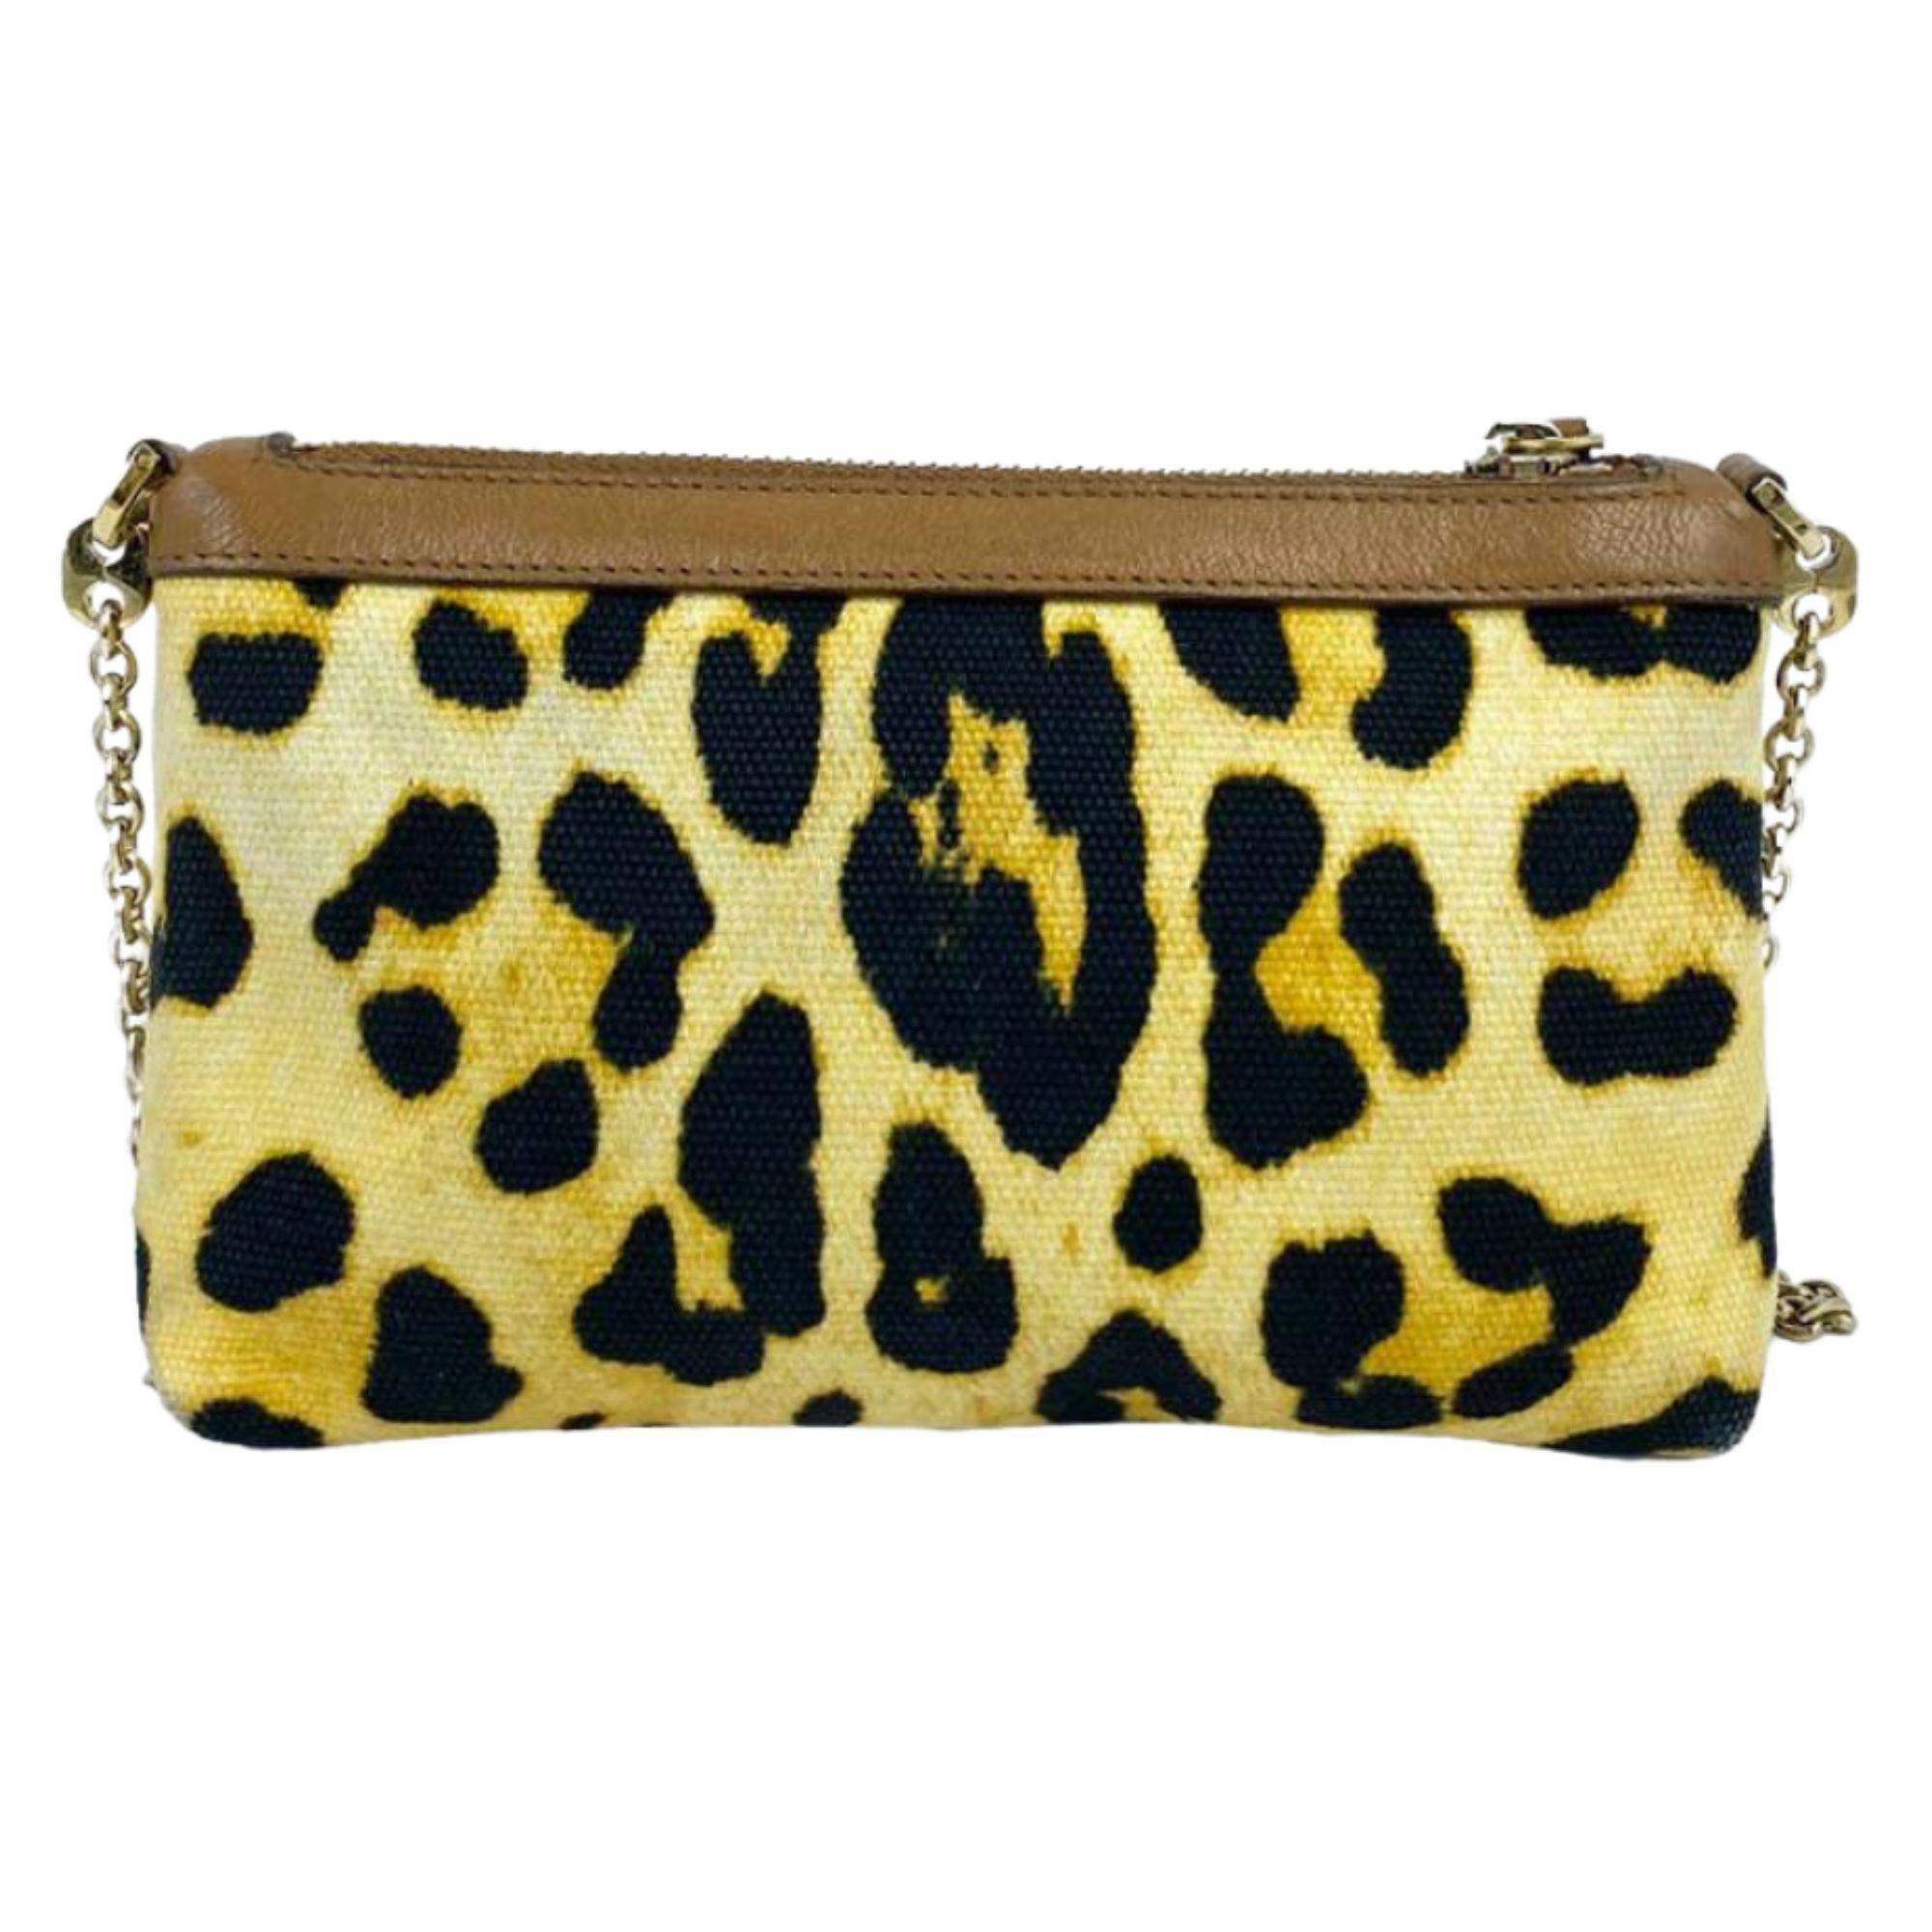 Dolce & Gabbana leopard print fabric crossbody bag. Chain strap. Brown leather lining. Features gold hardware, Dolce & Gabbana logo plaque at front, and a top zipper closure. Opens to clean interior.

Measurements:
Height: 14cm
Width: 22cm
Depth: